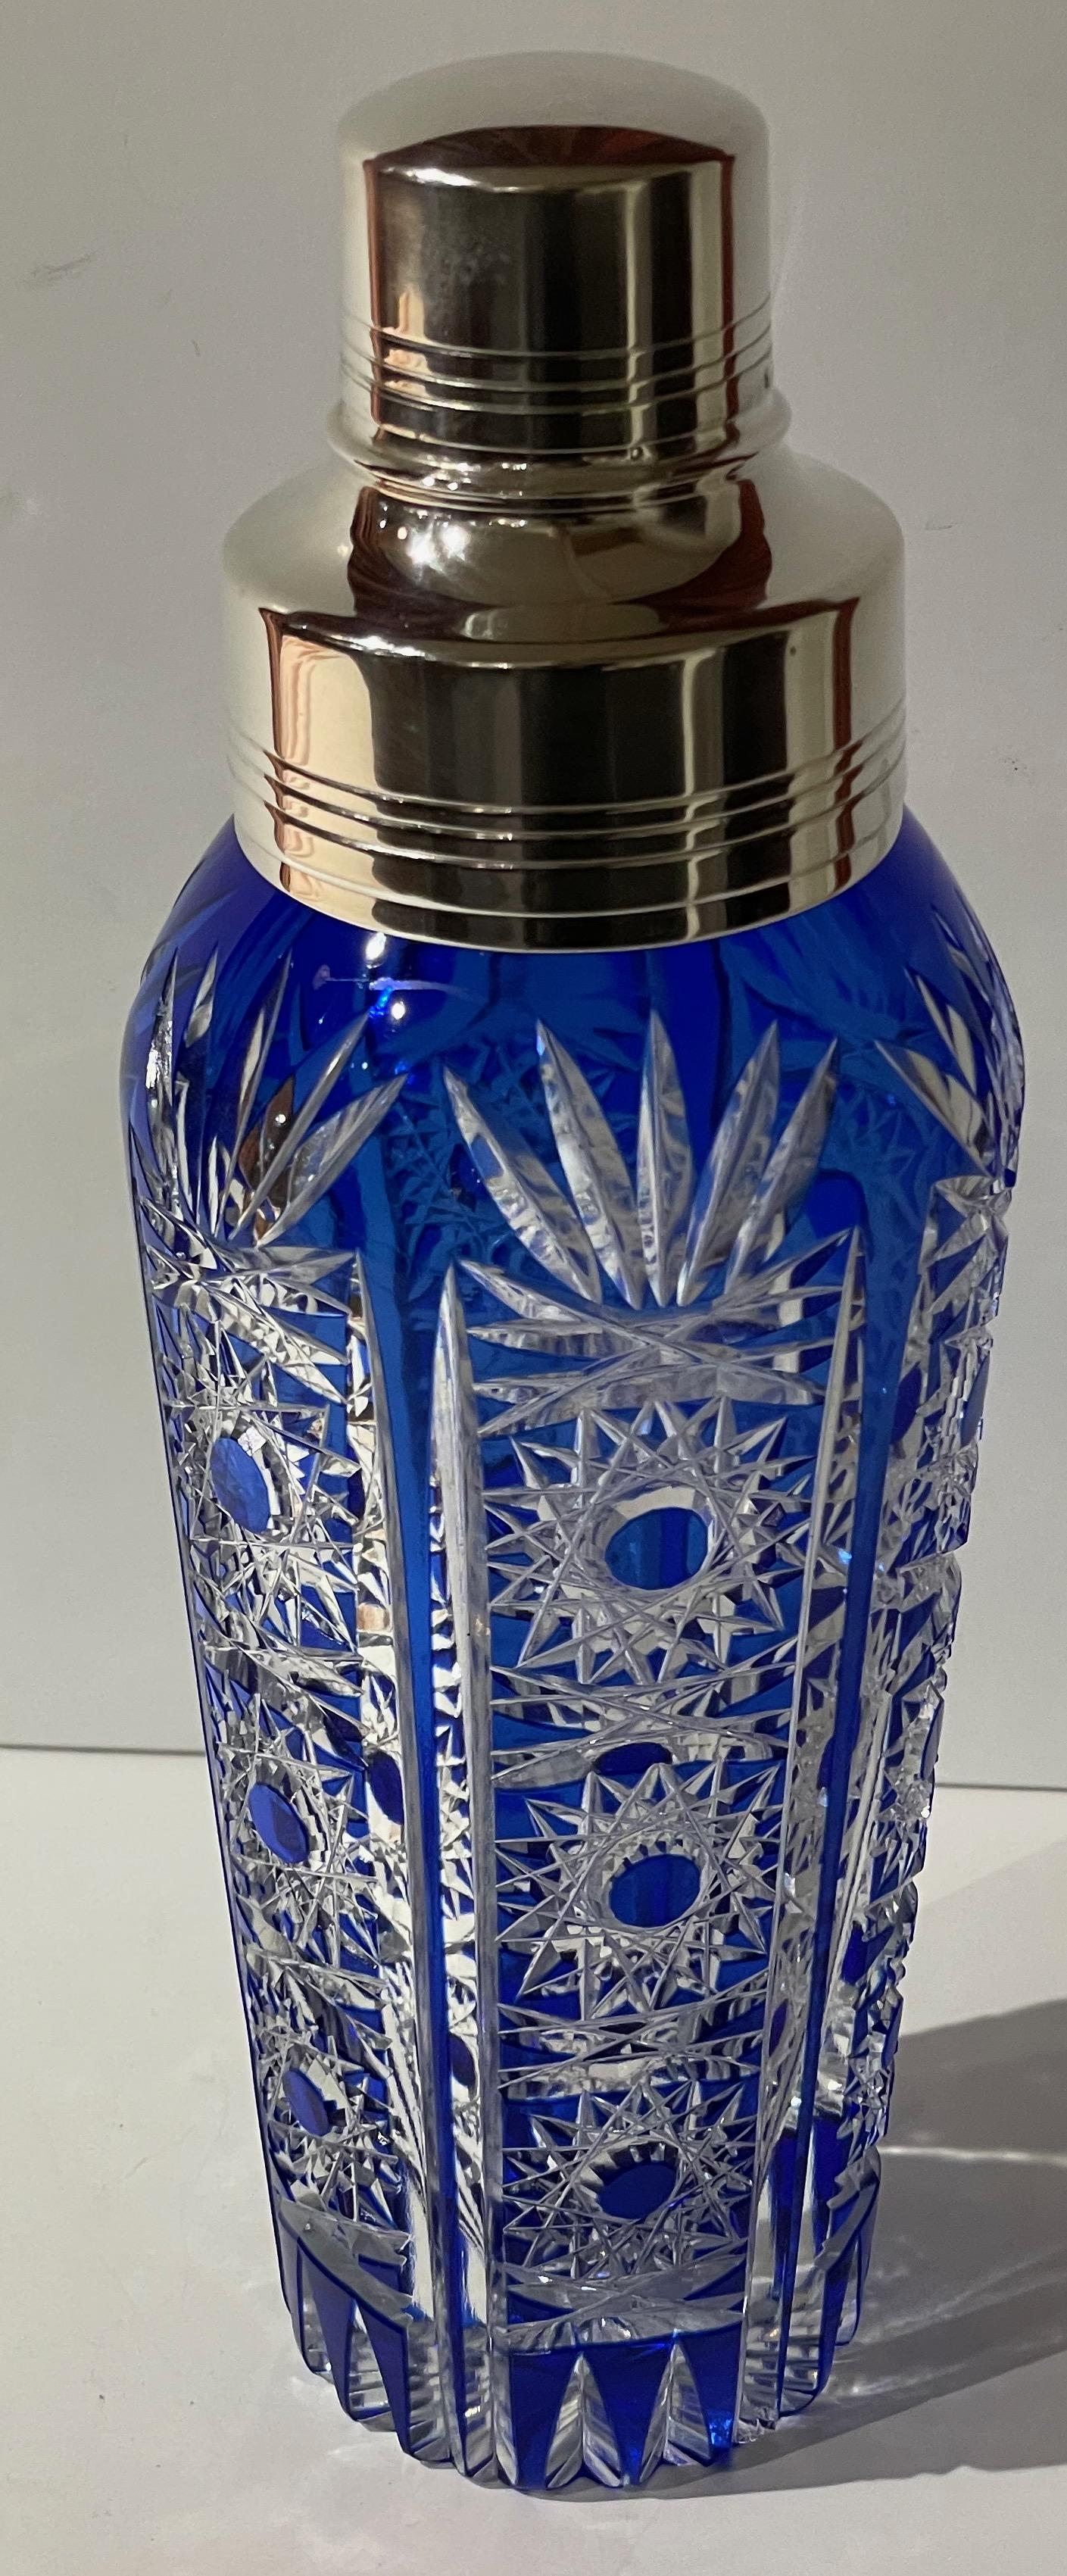 Cocktail Shaker Martini Etched Carved Blue Glass Shaker. Large size and fine details with deeply etched treatment. Possibly of Czech origin. Very well made and of course will make a perfect cocktail.
 
Look closely at all the details from the carved